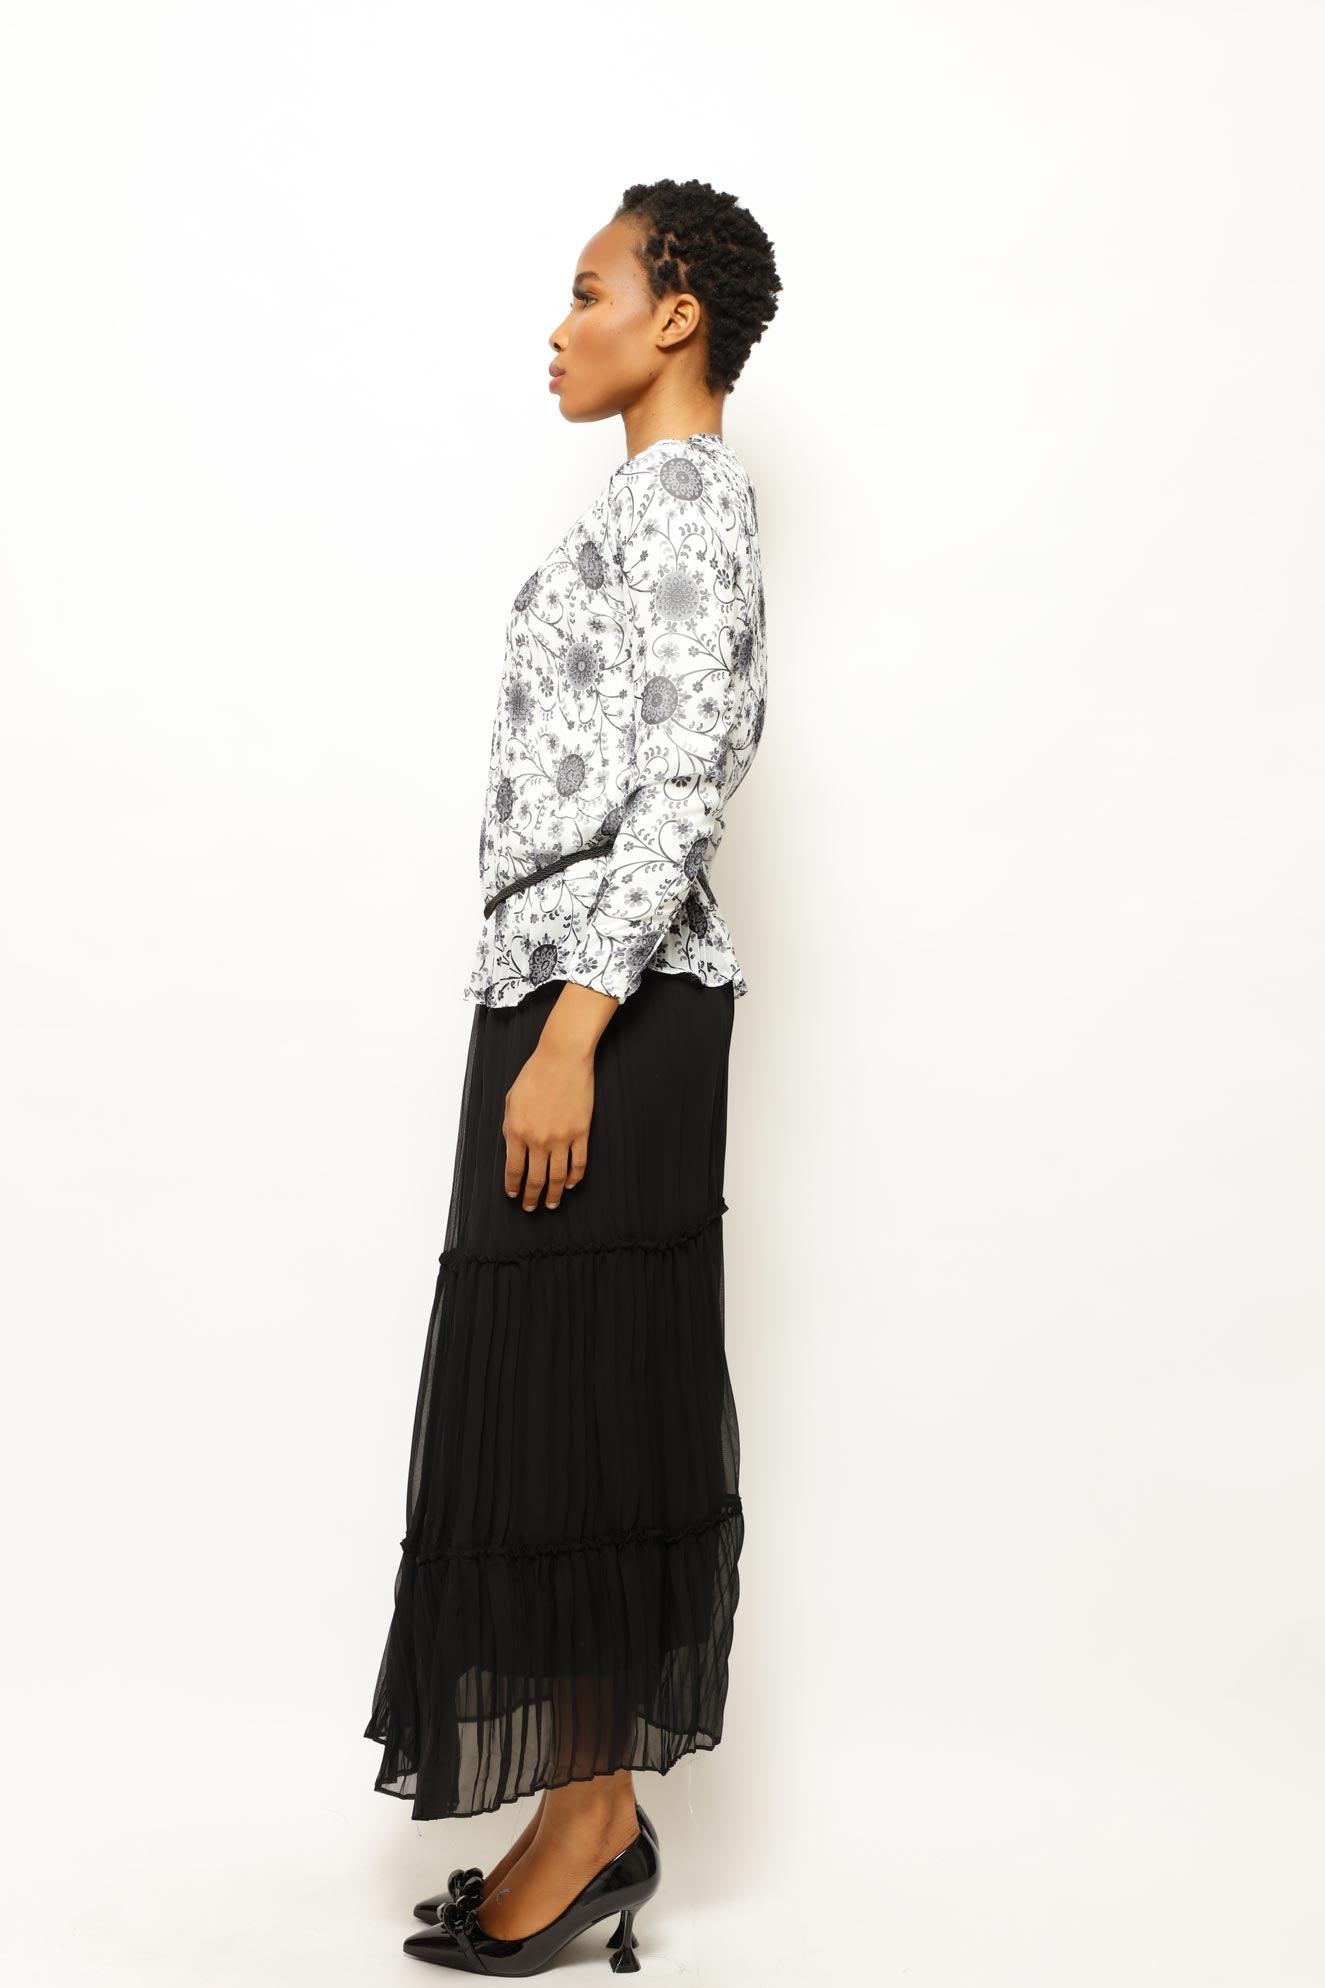 PLEATS AND SKIRT FLORAL SET, SET, CORADO, black, corado fashion, coradomoda, FASHION, floral, label, lifestyle, made in turkey, new collection, pleat, set, statement, style, women, women's fashion, coradomoda, coradomoda.com